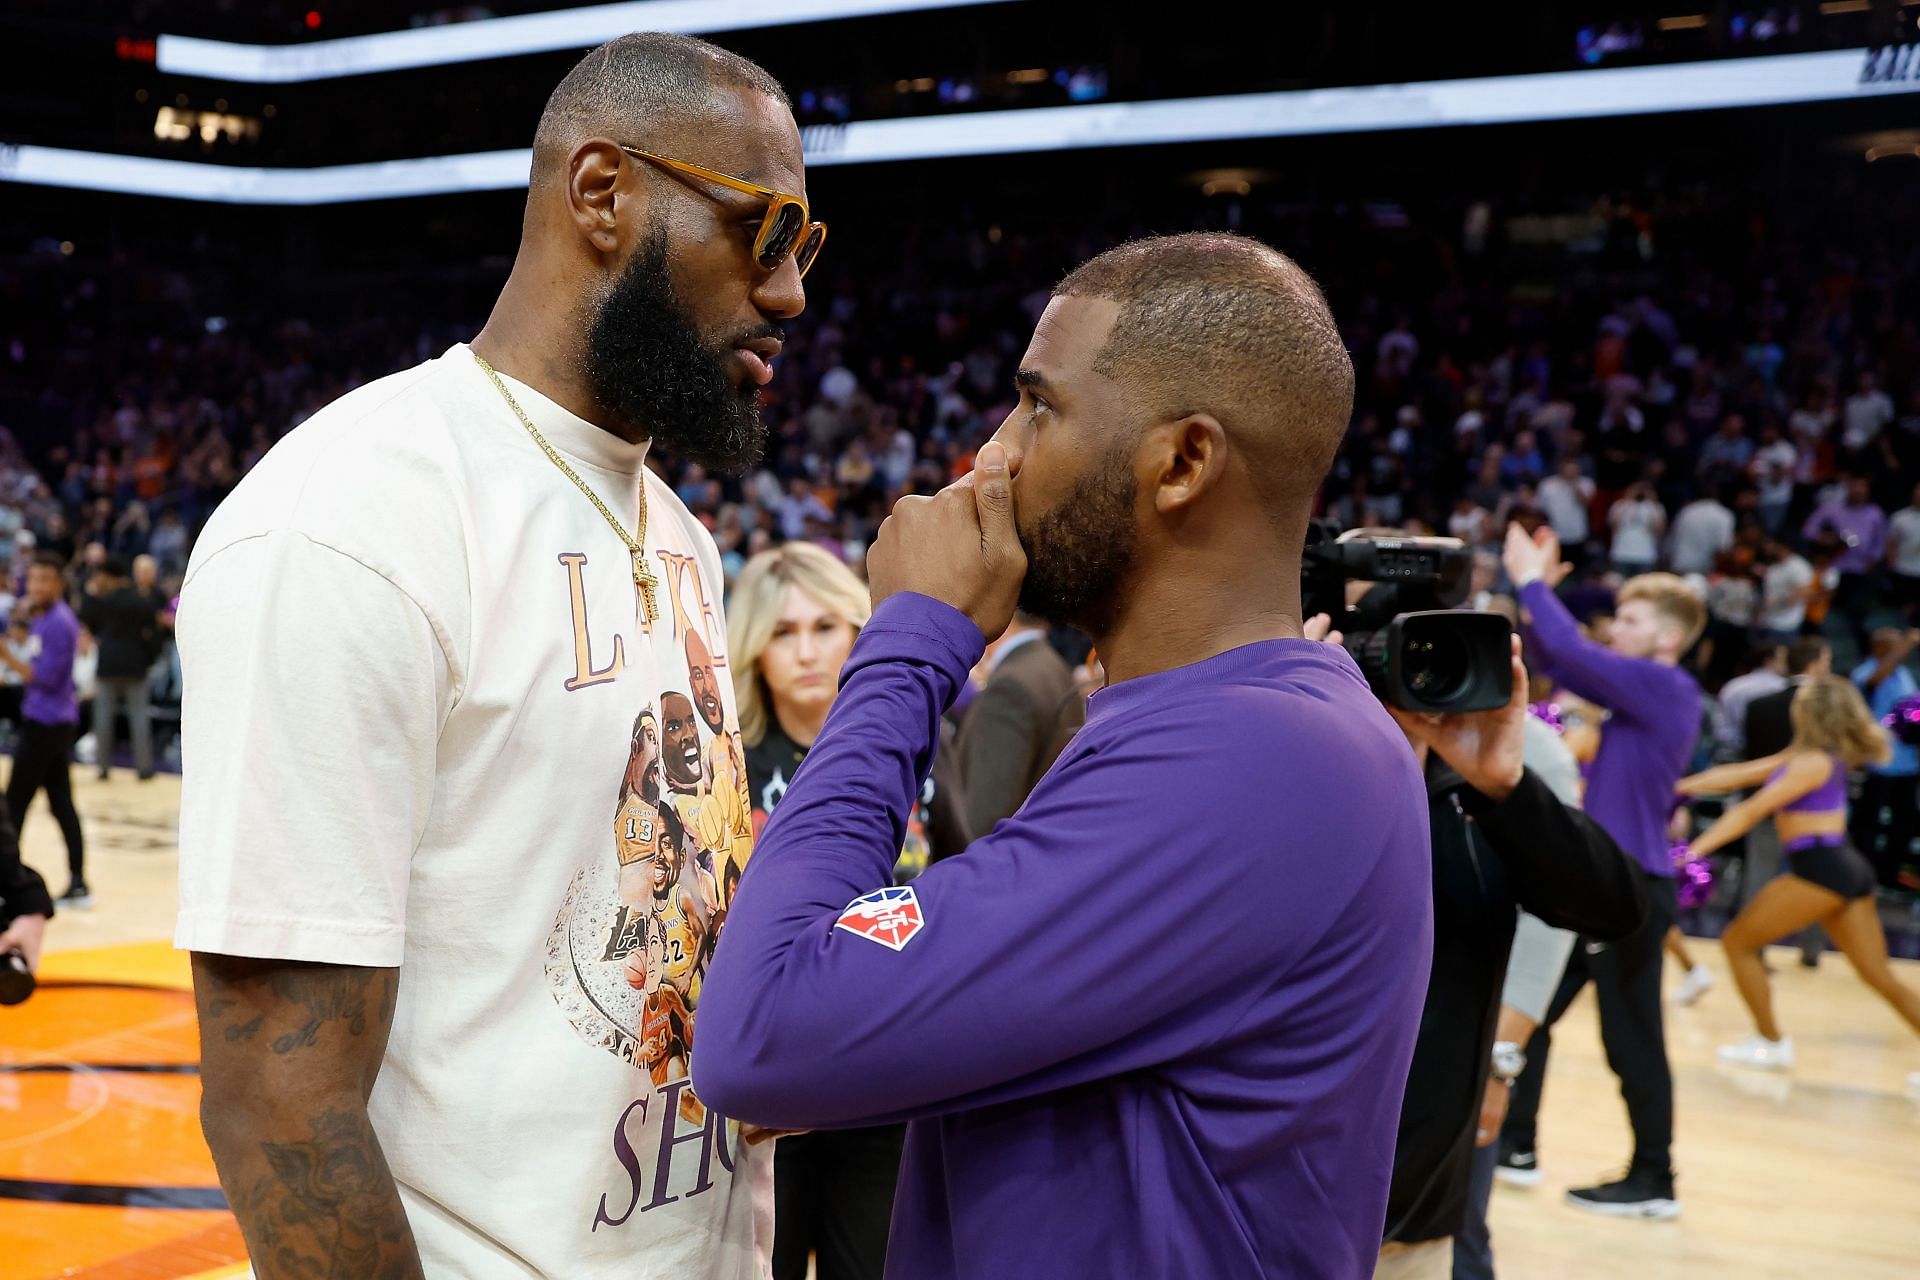 Chris Paul and LeBron James after a Lakers vs. Phoenix Suns game.